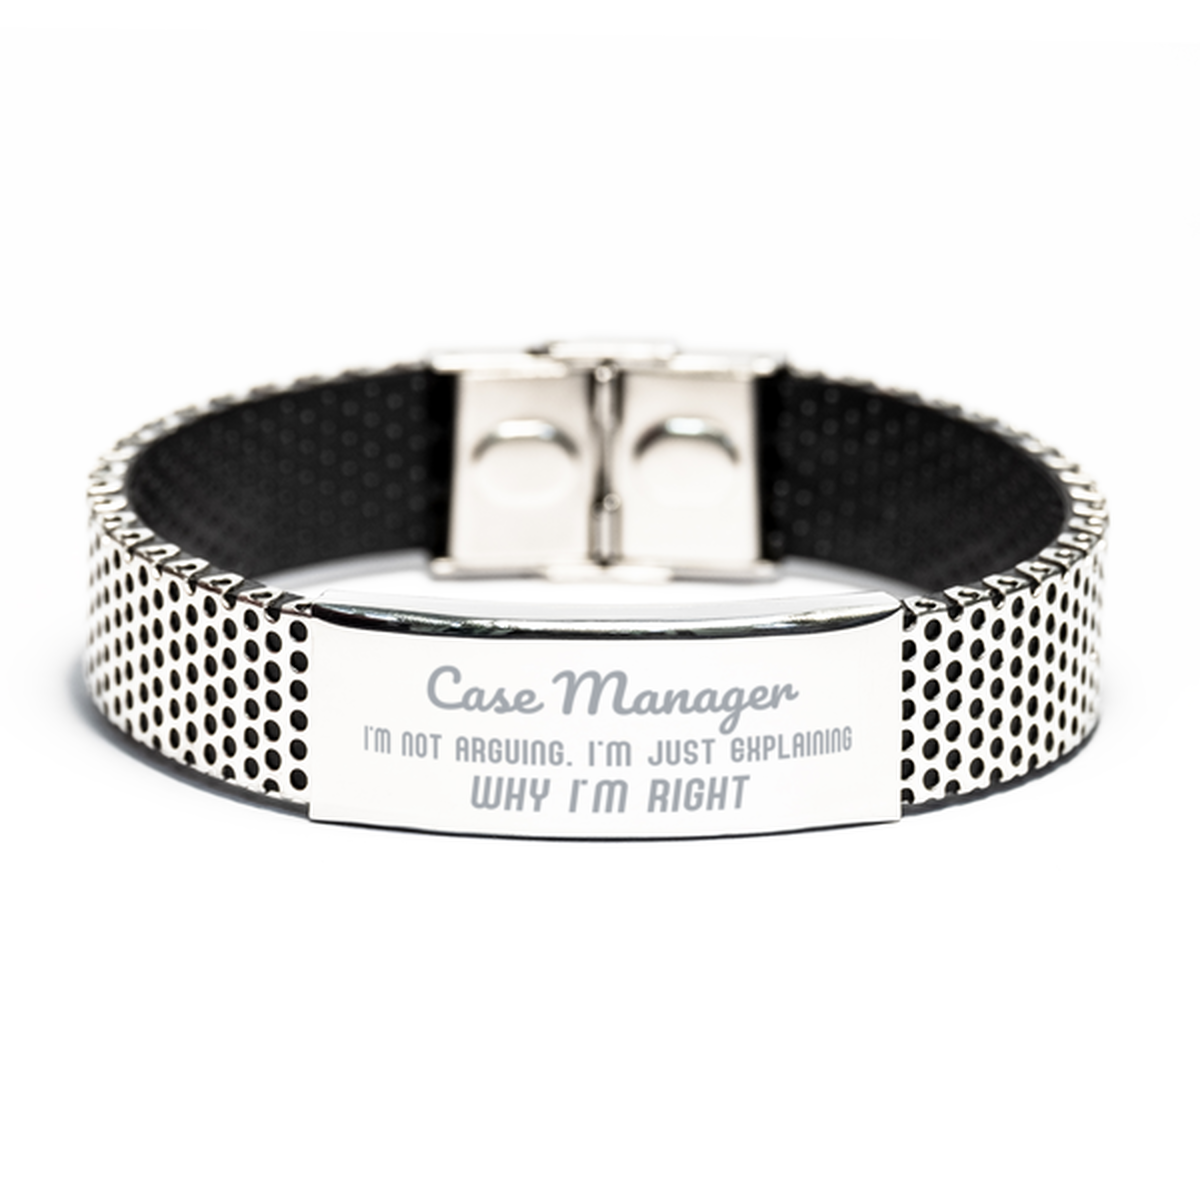 Case Manager I'm not Arguing. I'm Just Explaining Why I'm RIGHT Stainless Steel Bracelet, Funny Saying Quote Case Manager Gifts For Case Manager Graduation Birthday Christmas Gifts for Men Women Coworker